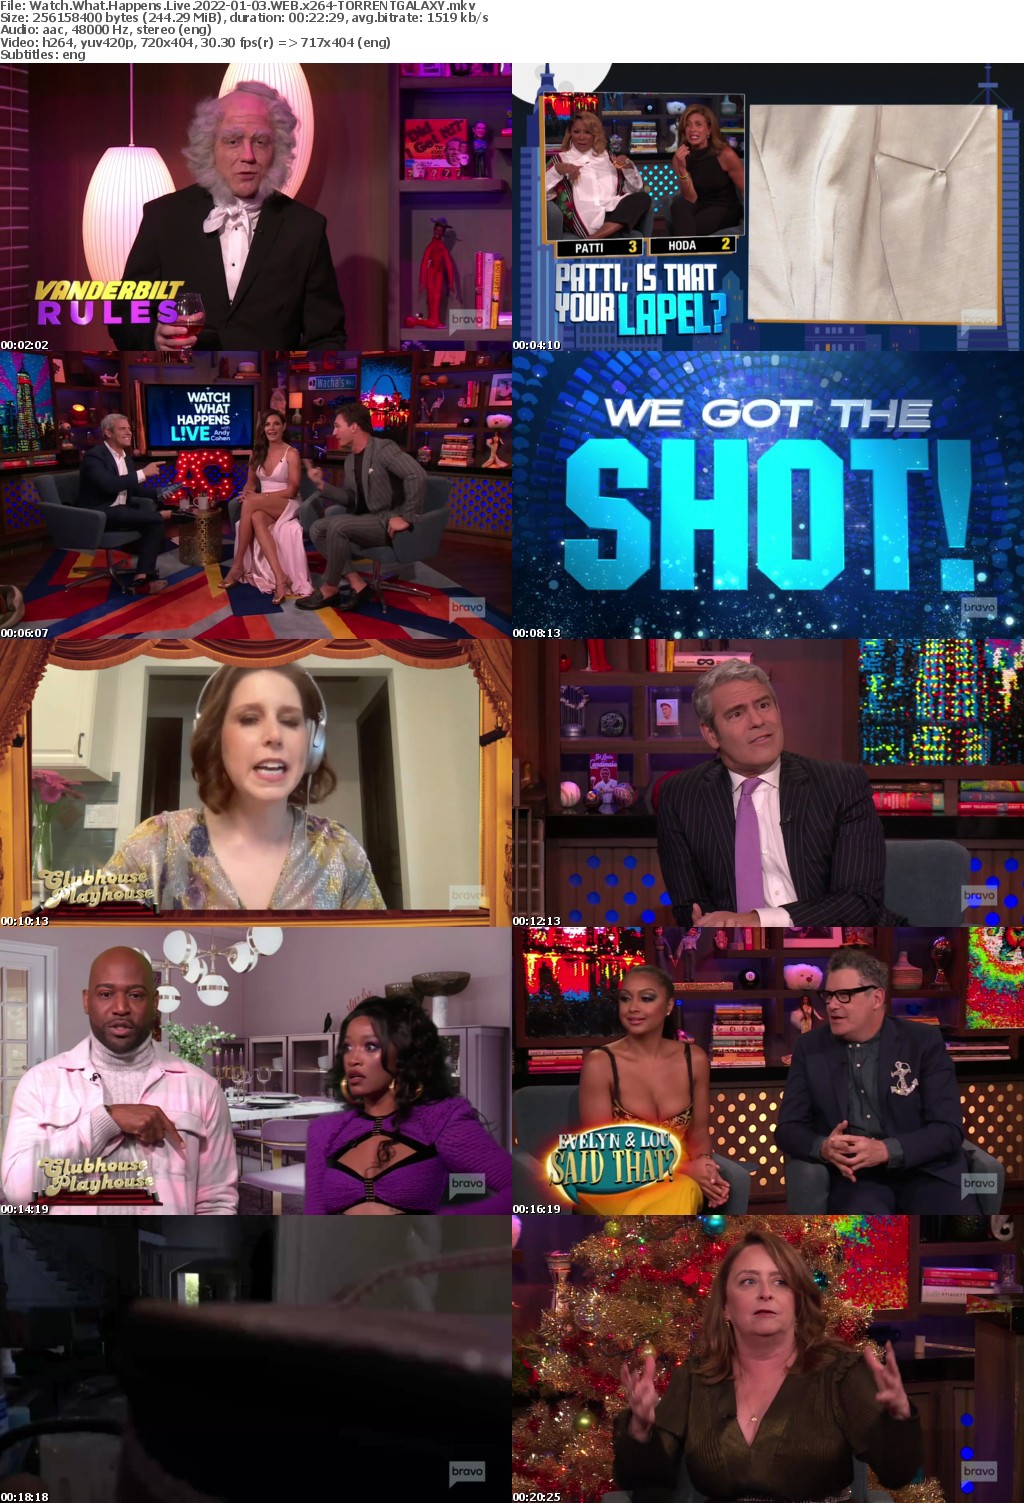 Watch What Happens Live 2022-01-03 WEB x264-GALAXY